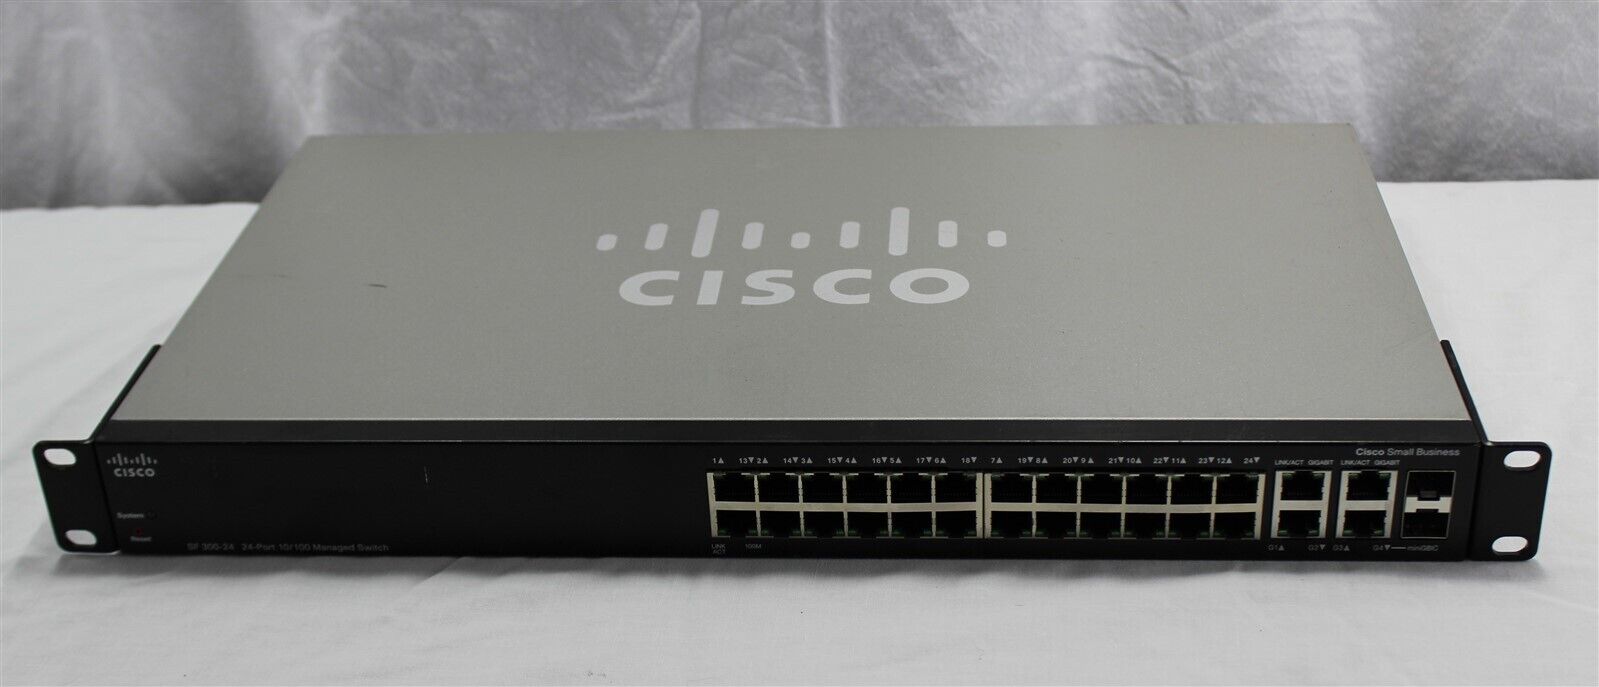 Cisco Model SF300-24 Network PoE Managed Switch Tested Works With AC Cable